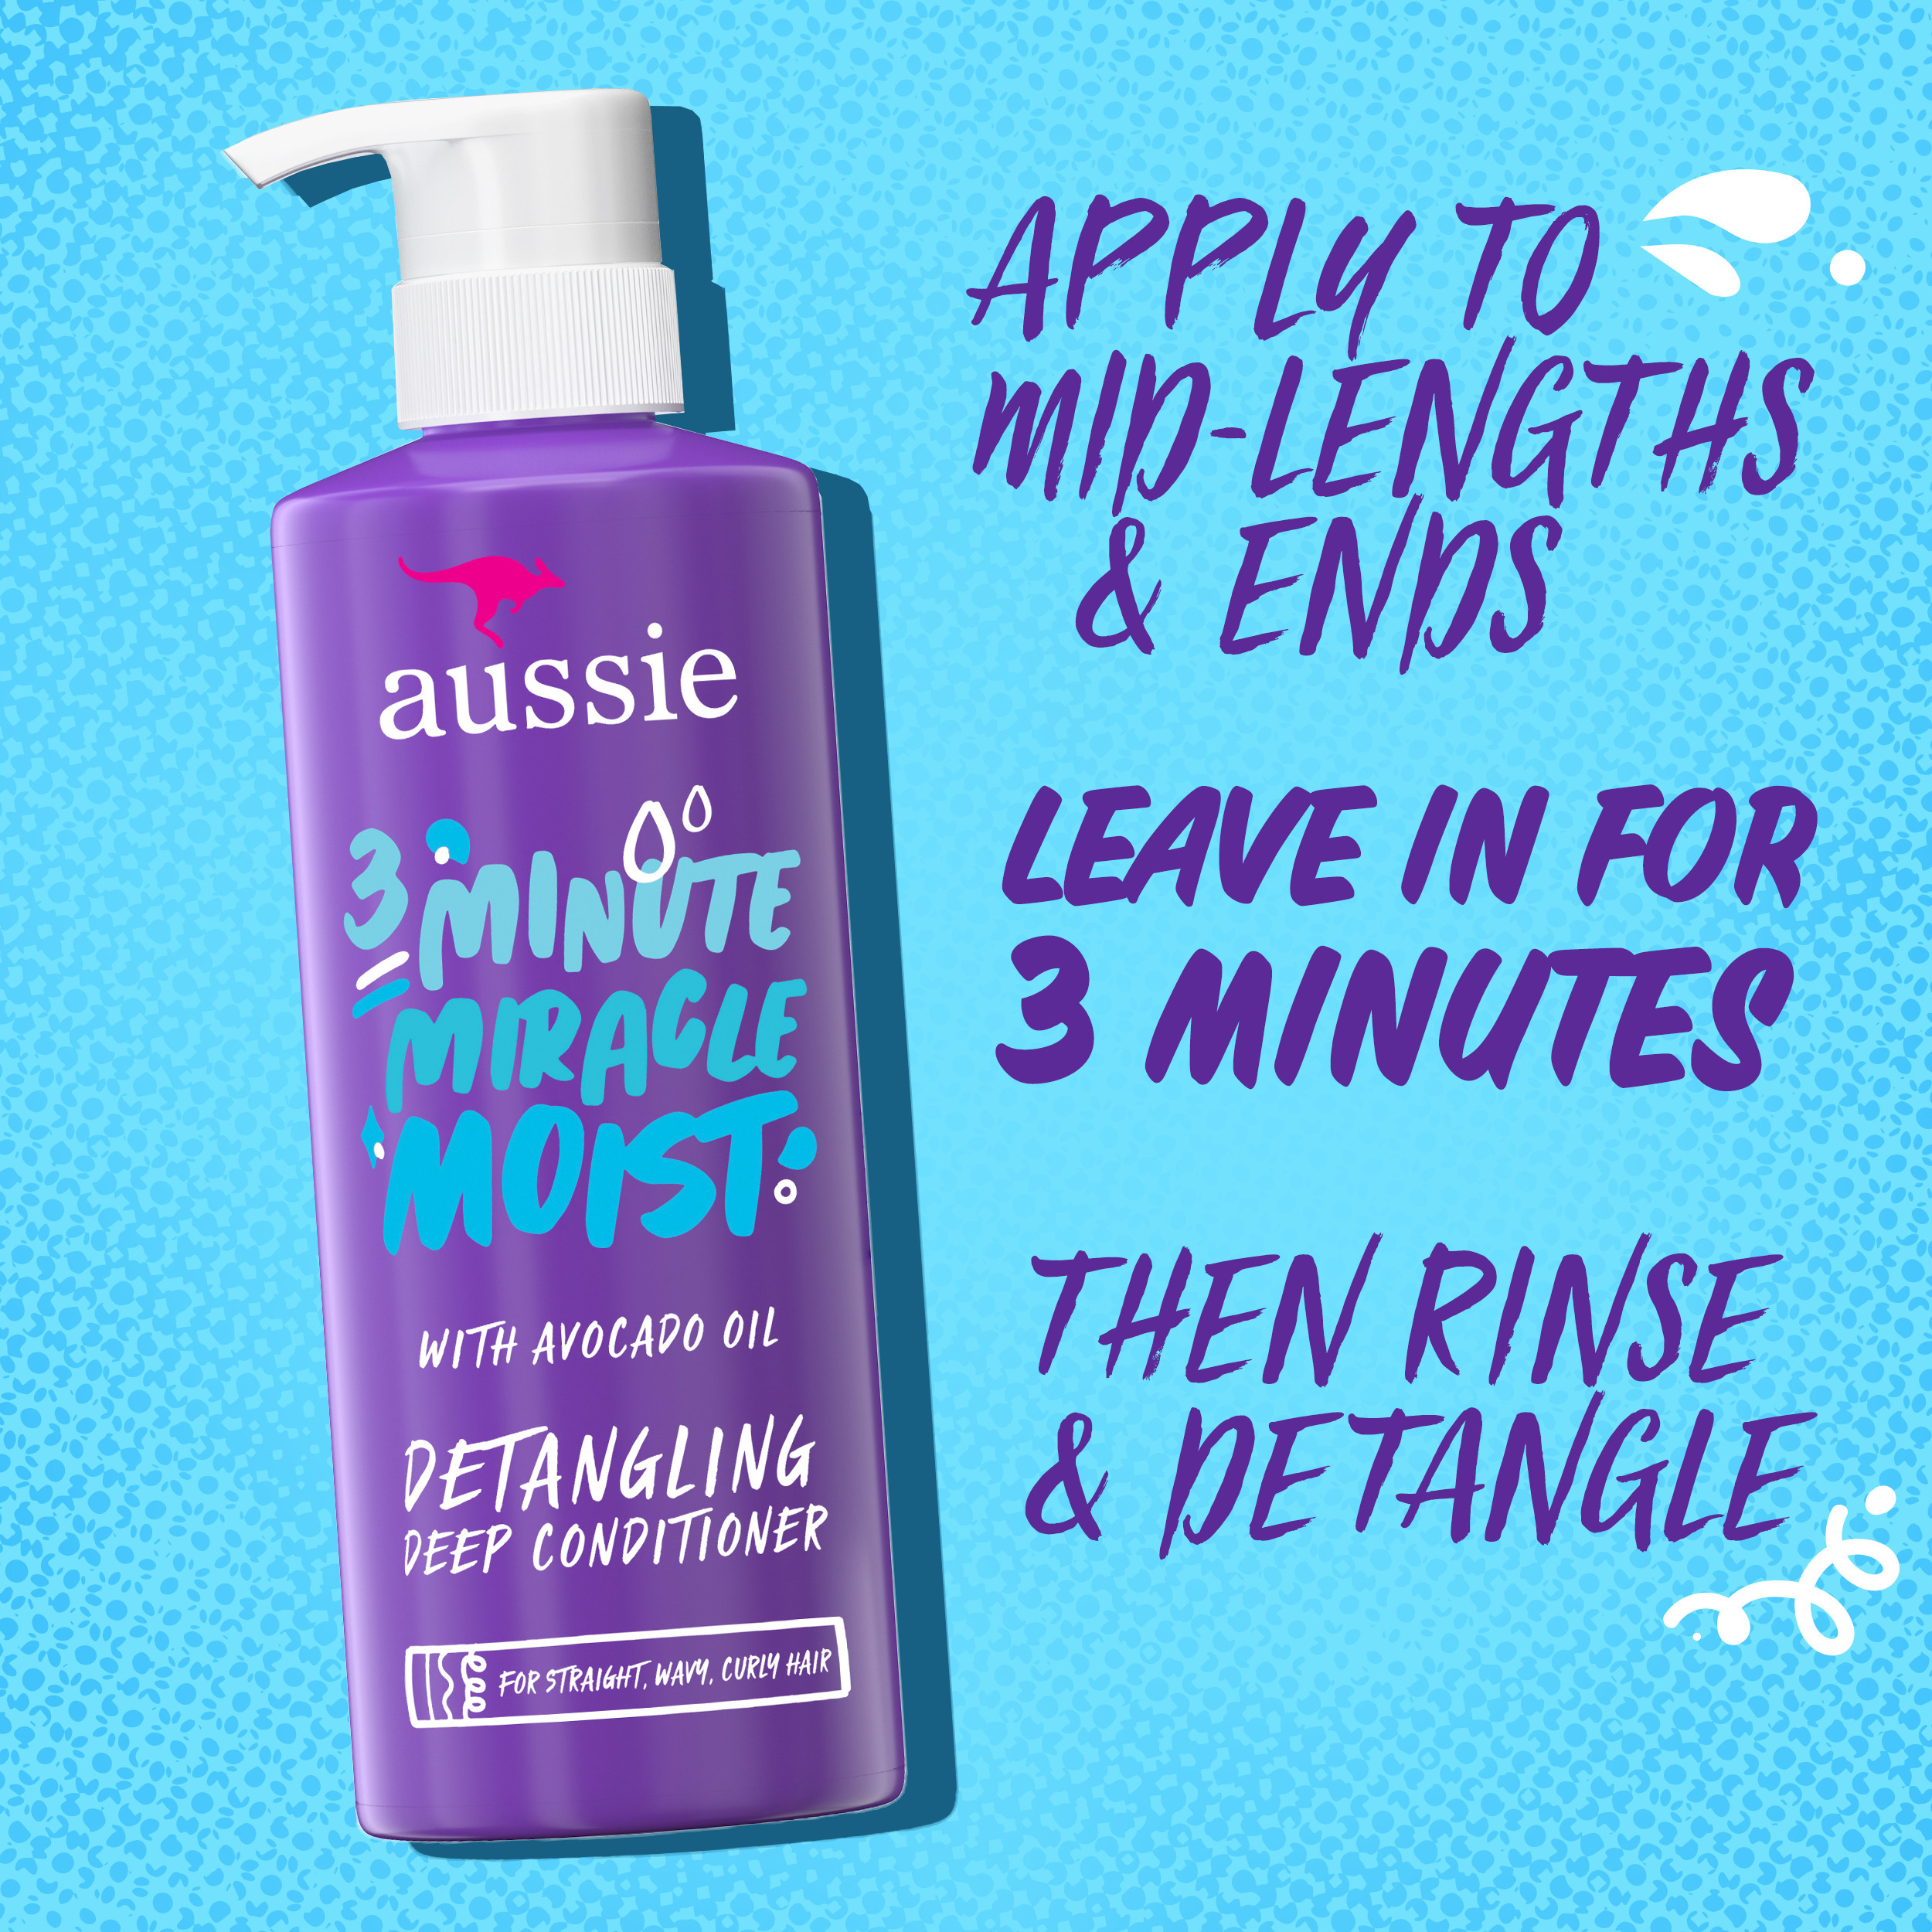 Aussie 3 Minute Miracle Moist Deep Conditioner, Paraben Free, 16 oz - image 4 of 12